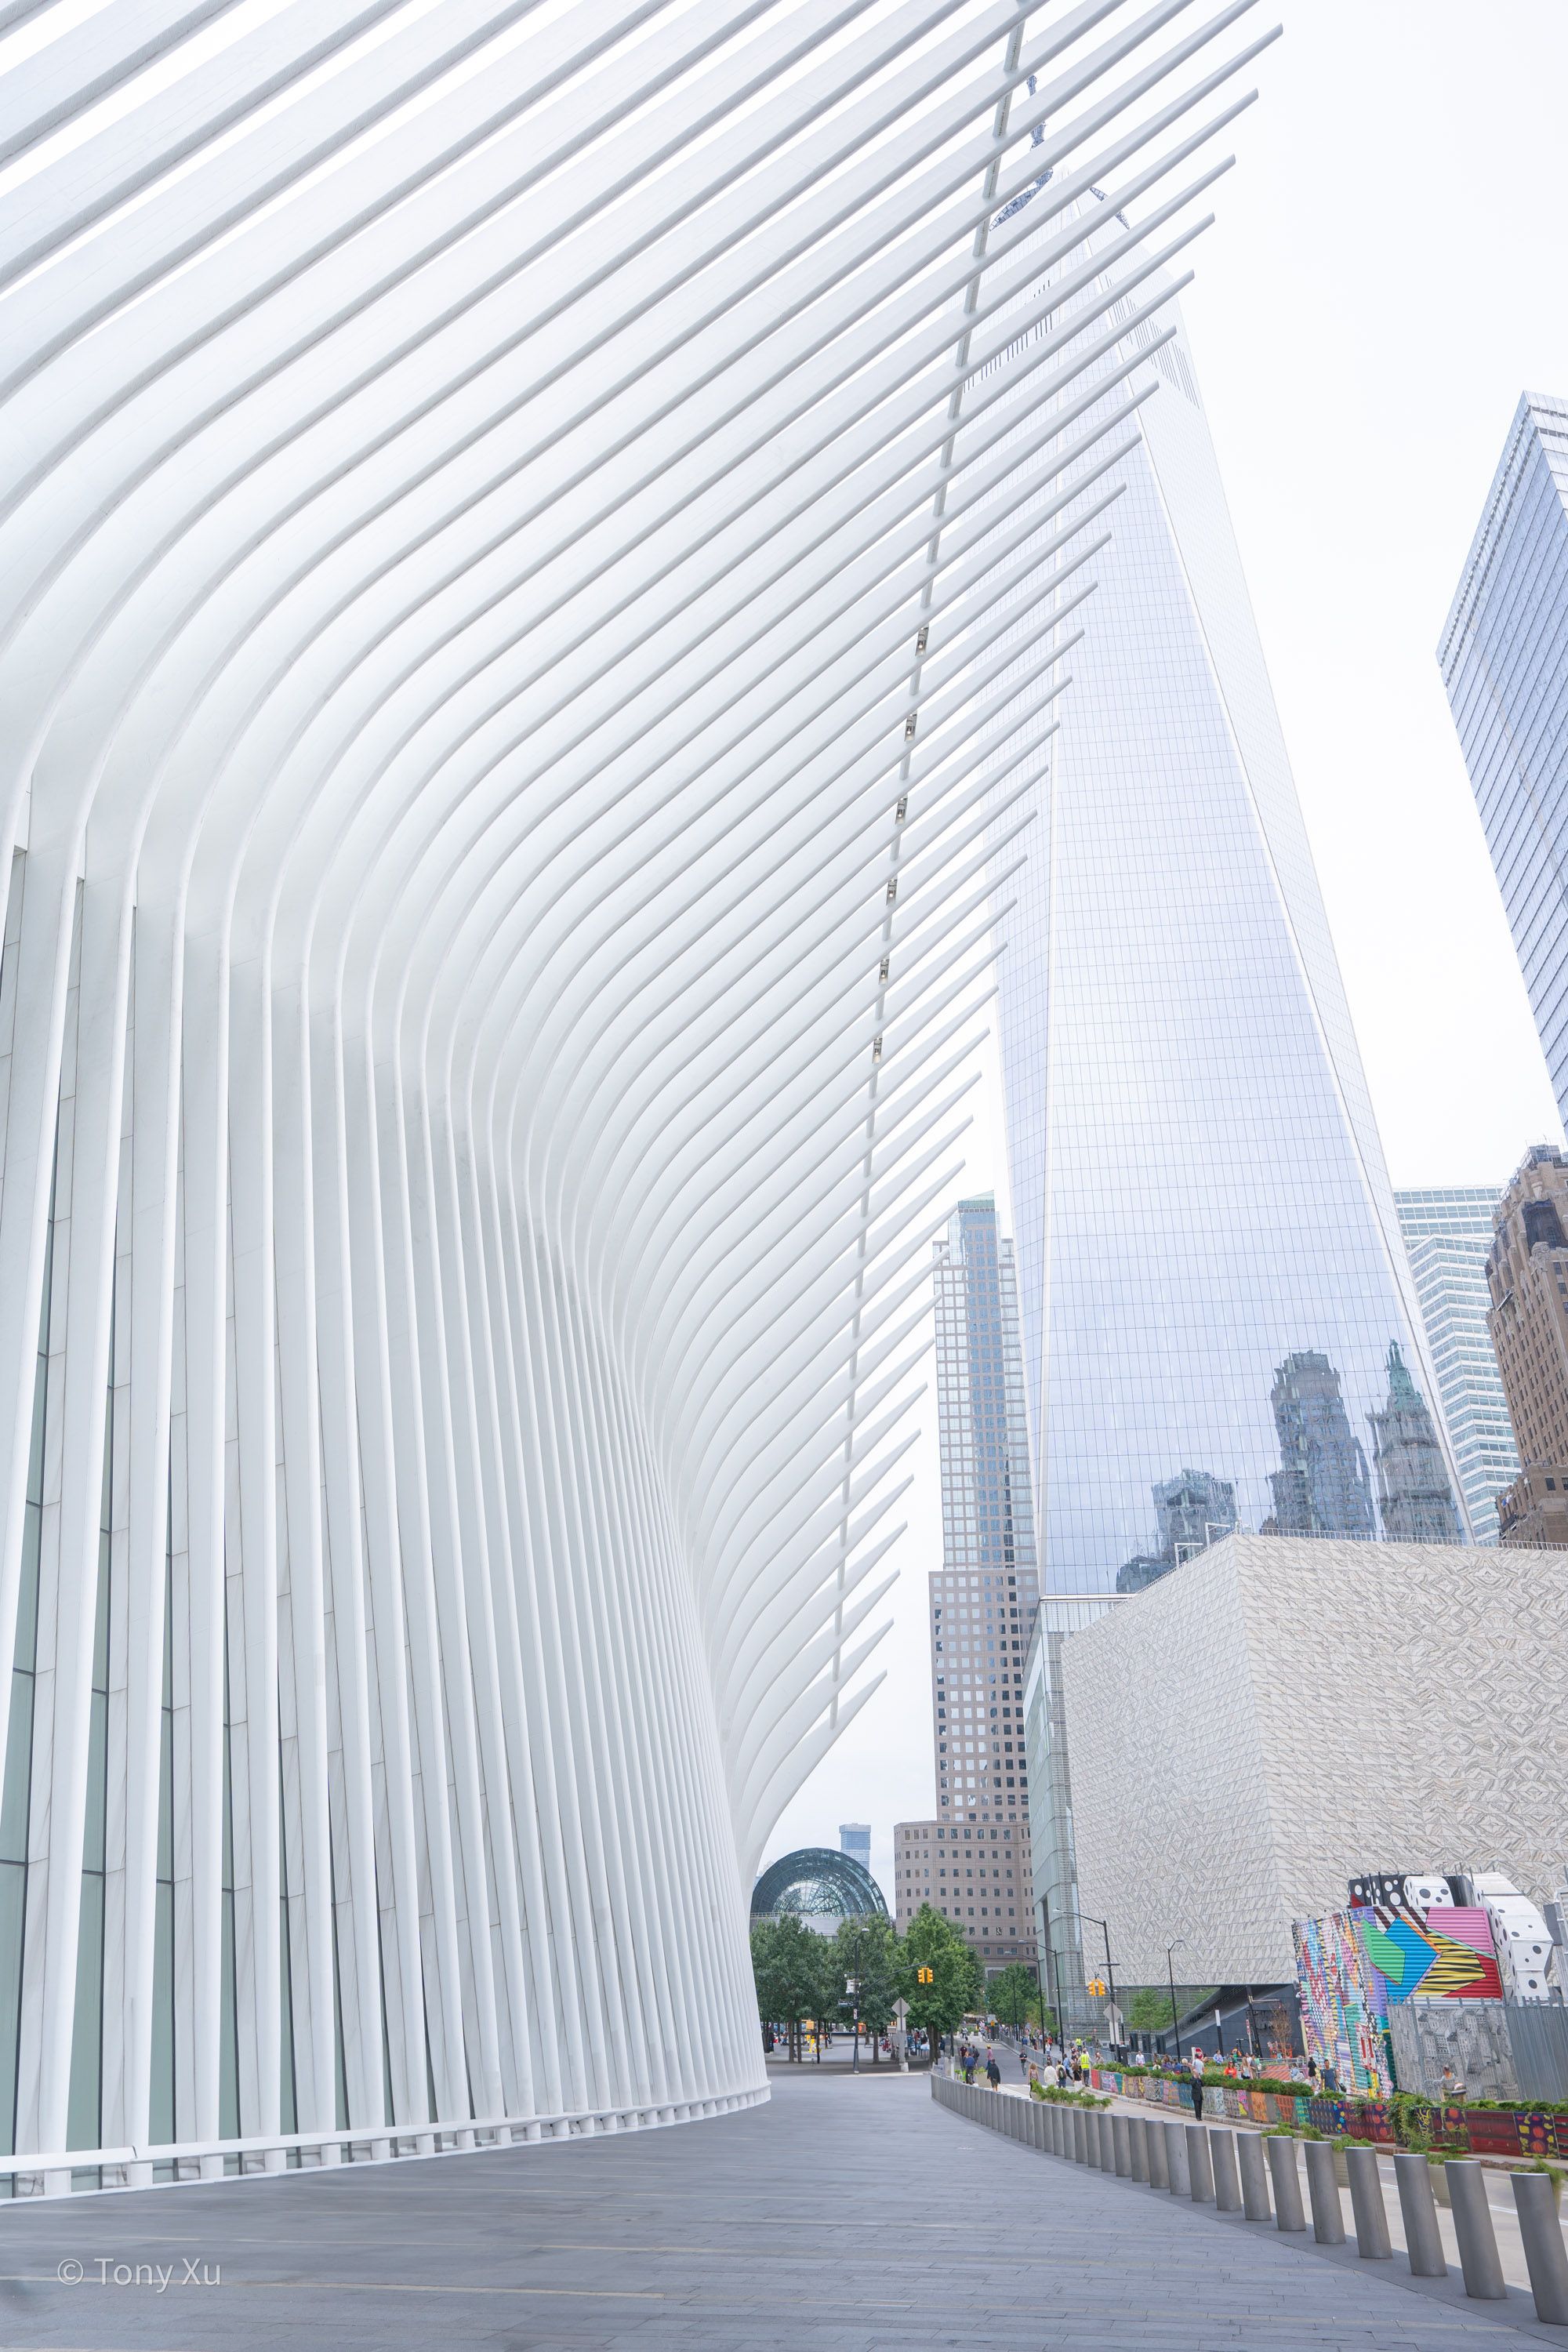 The Oculus and World Trade Center